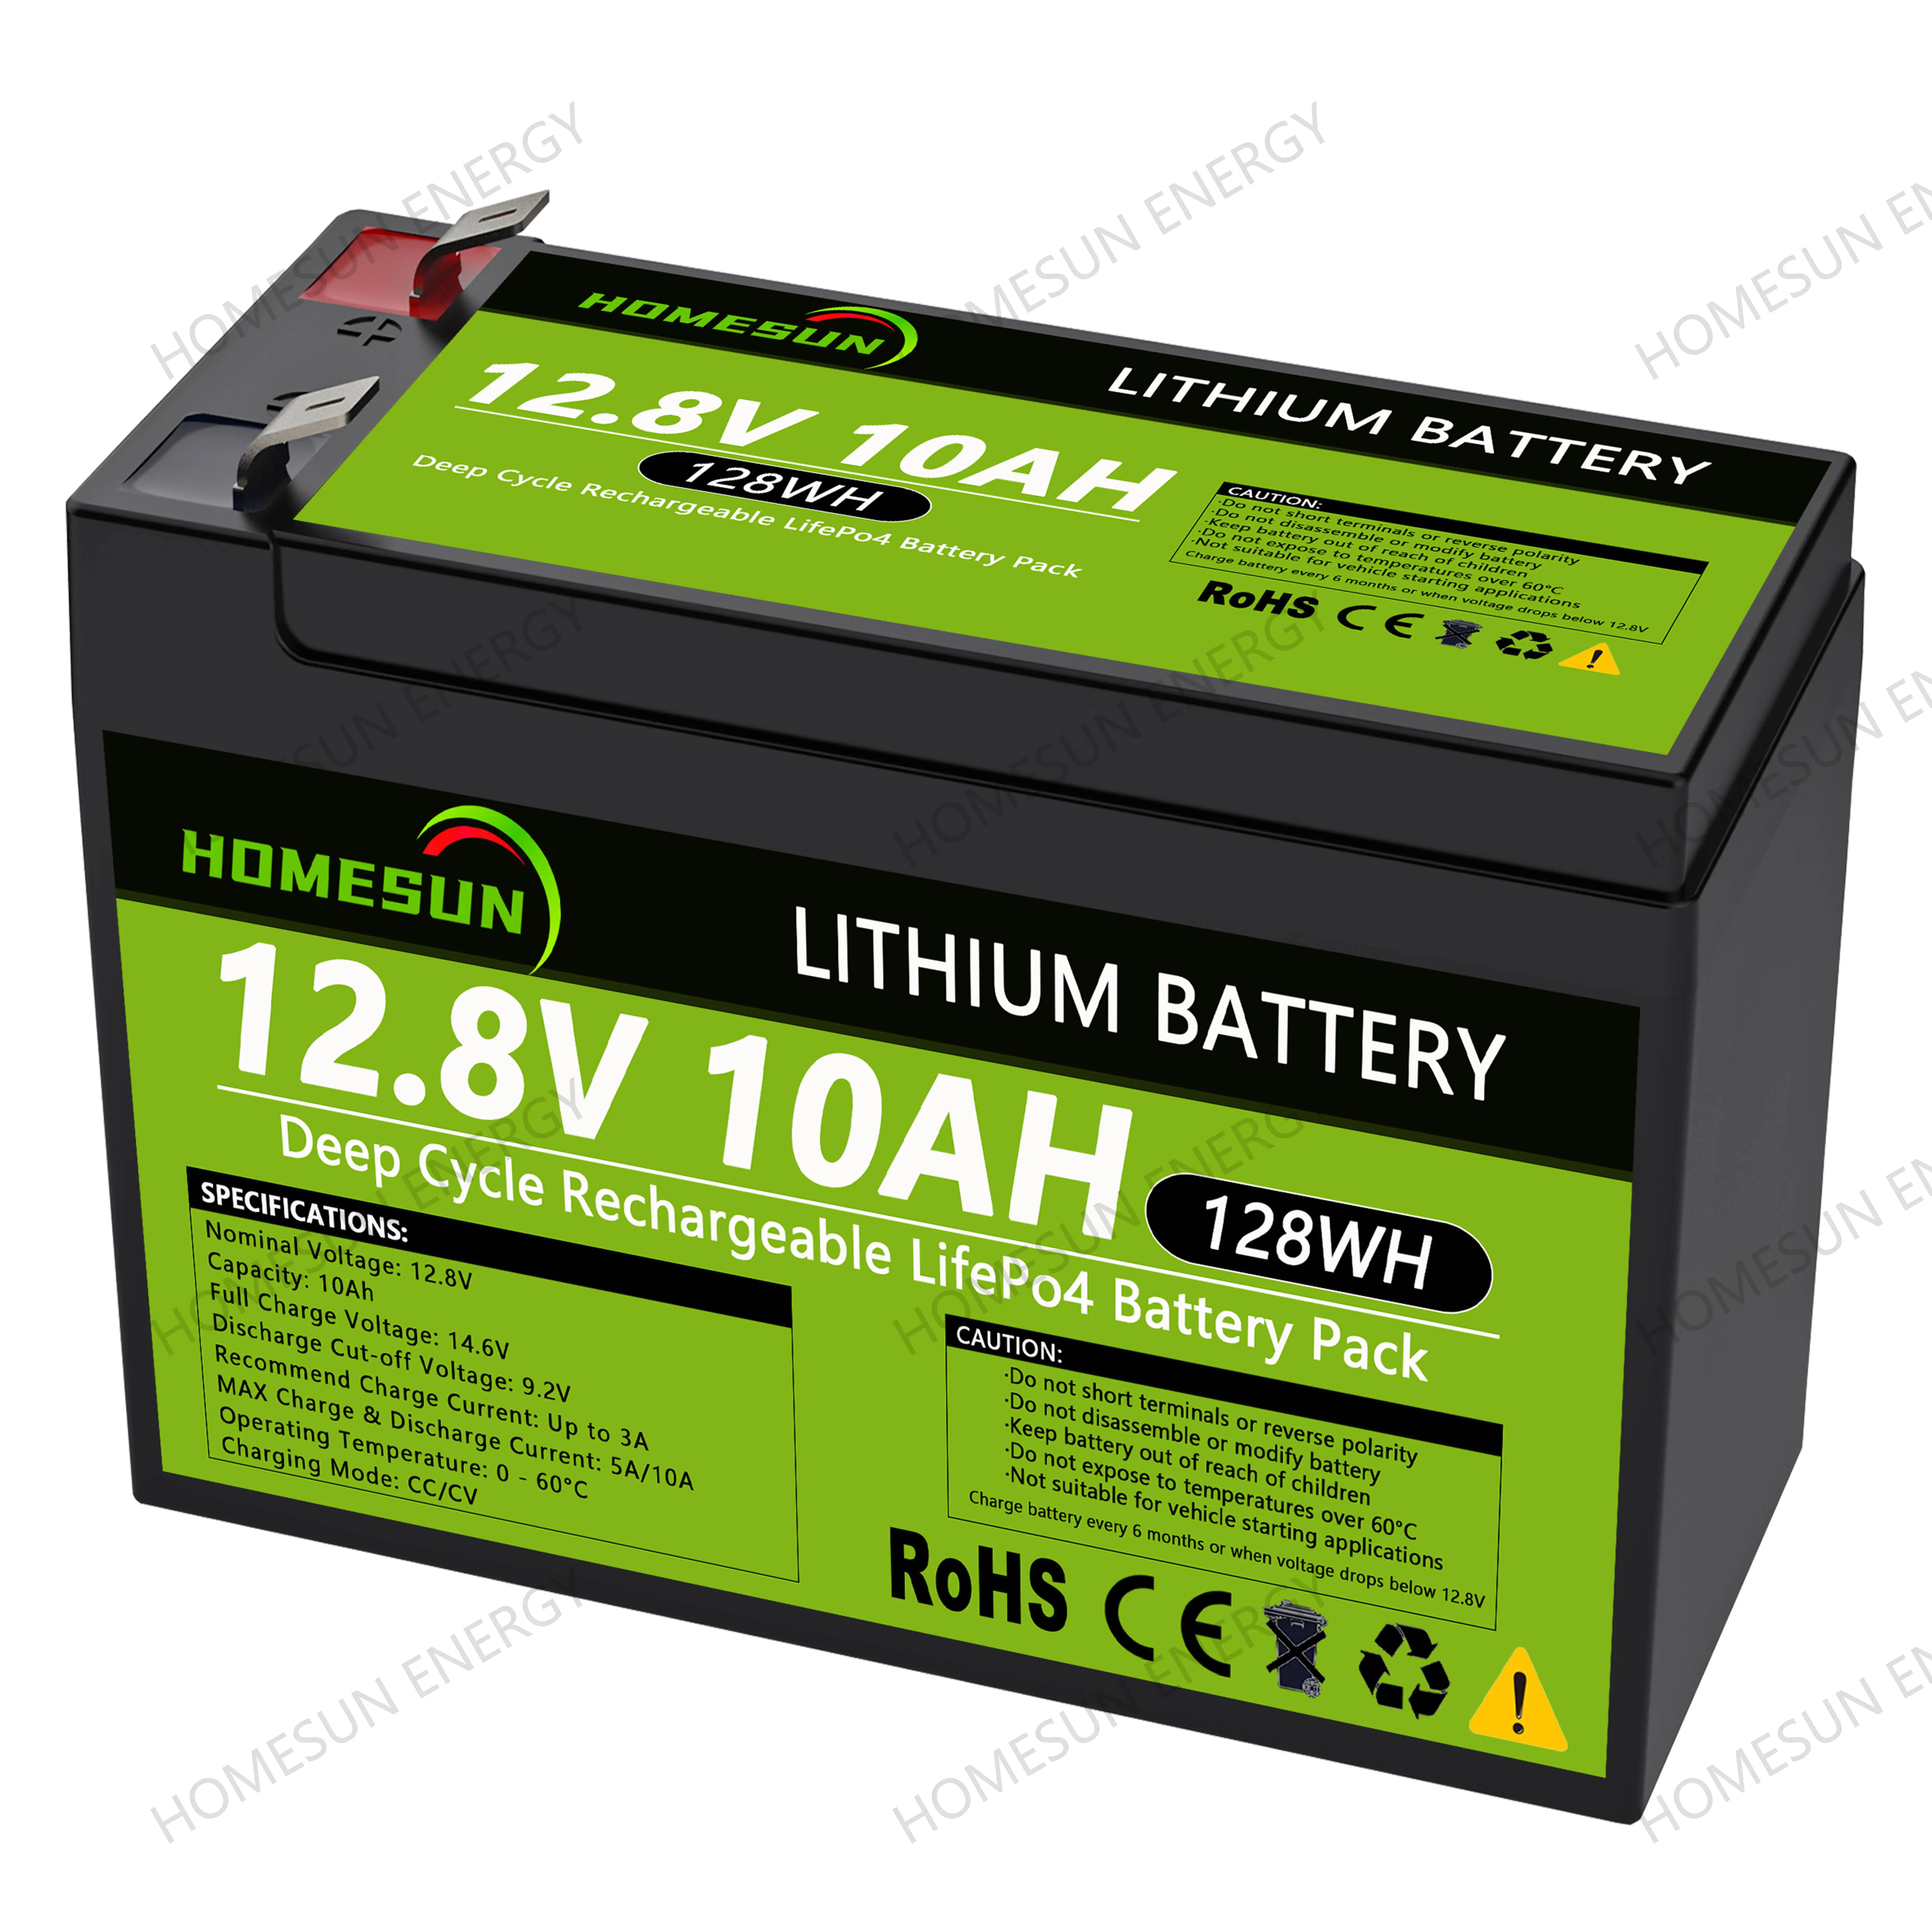 Lifepo4 12v 7ah 10ah Lithium Ion Battery Pack For Rv, Marine, Kids Scooters, Power Wheels, Trolling Motor